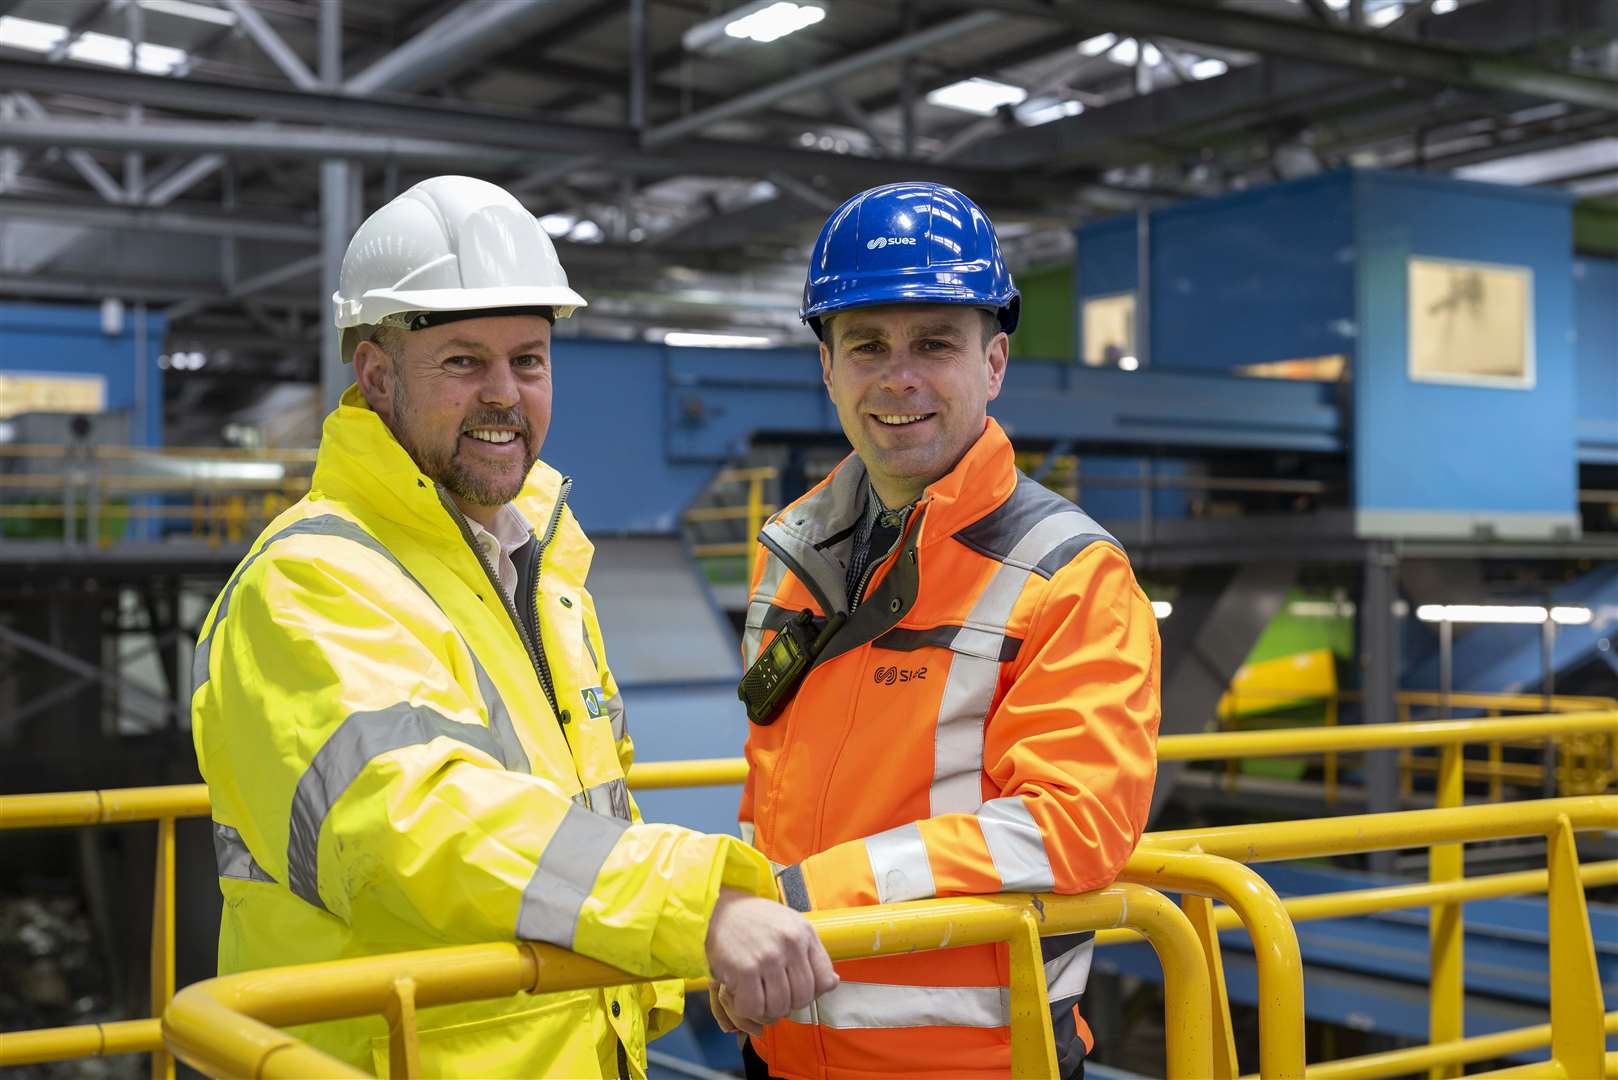 Grant Keenan of Keenan Recycling (left) and Colin Forshaw of SUEZ